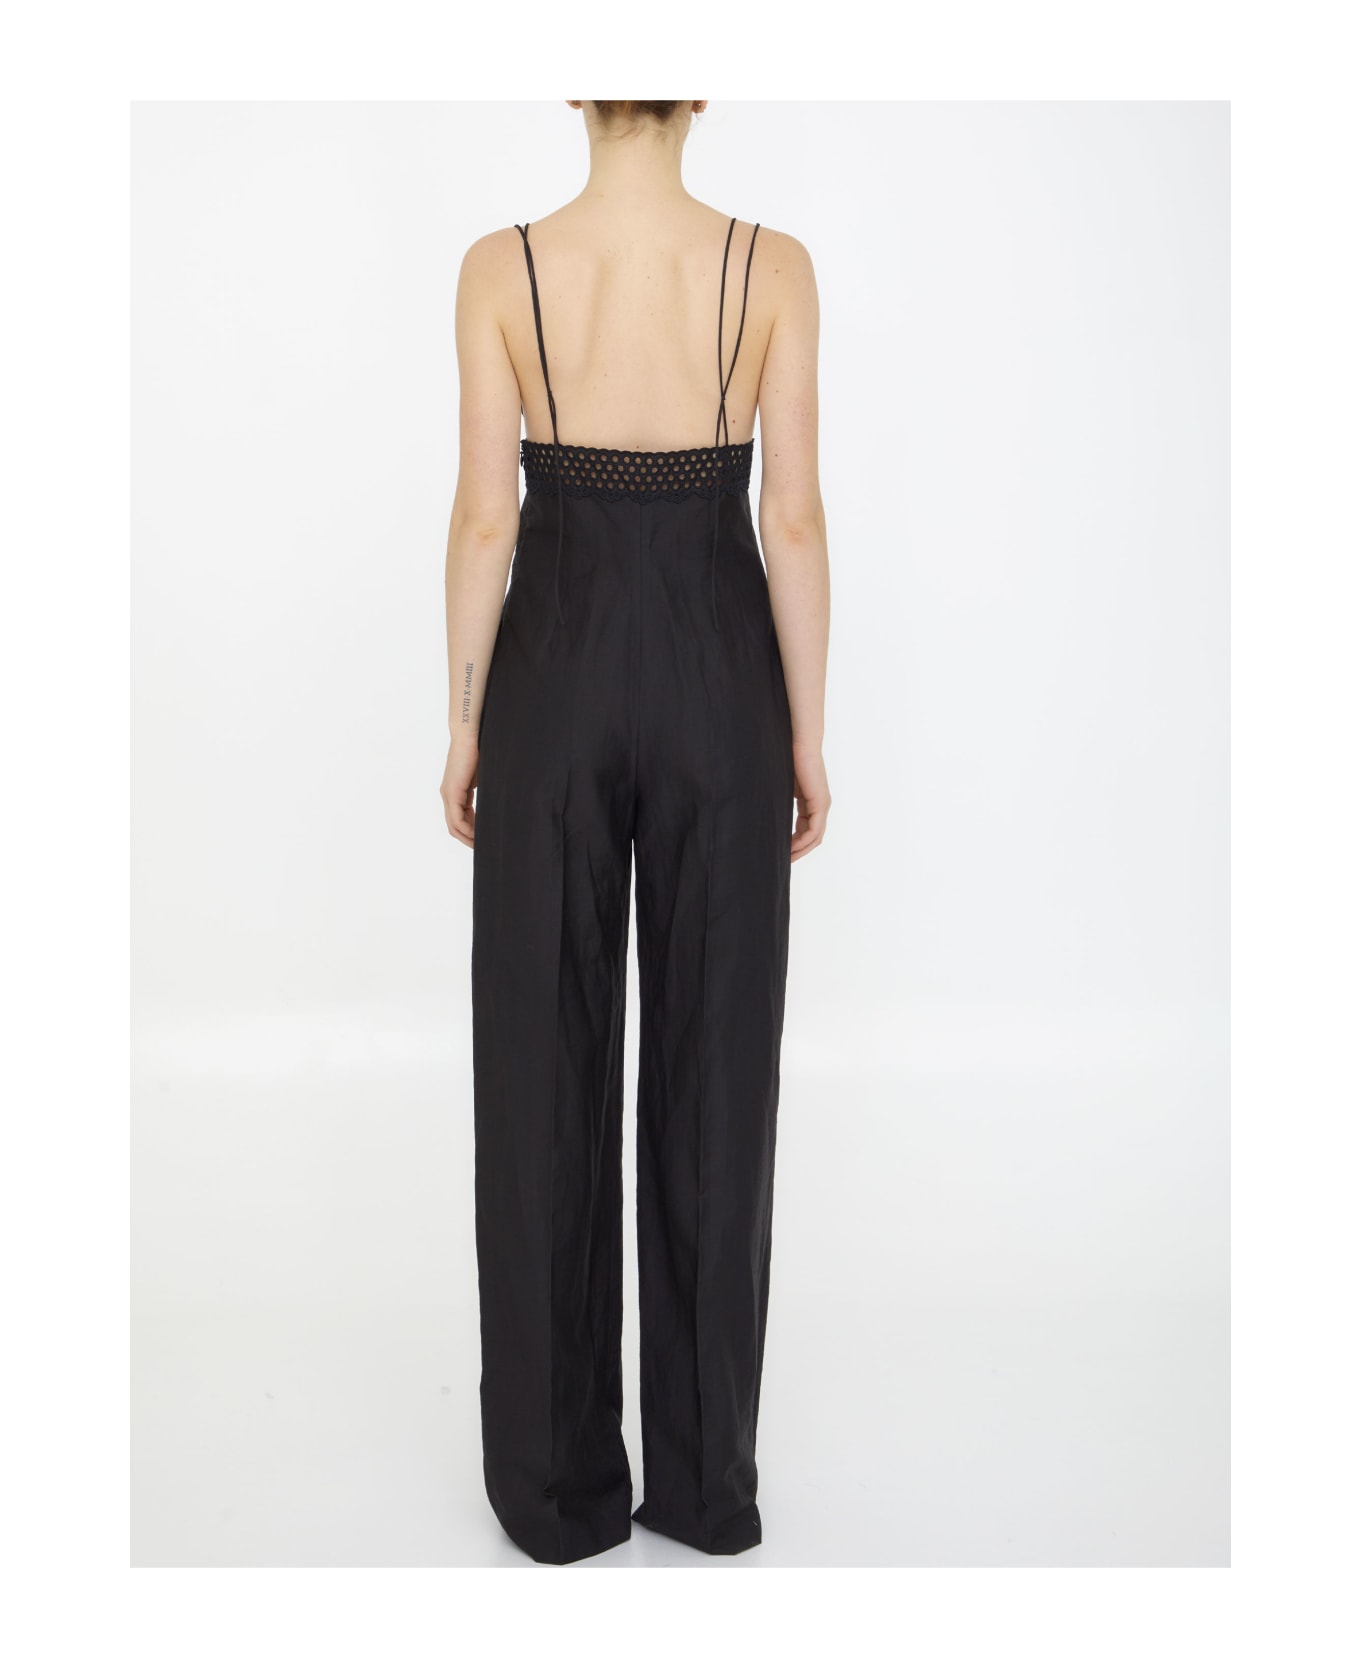 Stella McCartney Broderie Anglaise Bustier Jumpsuit - BLACK ジャンプスーツ